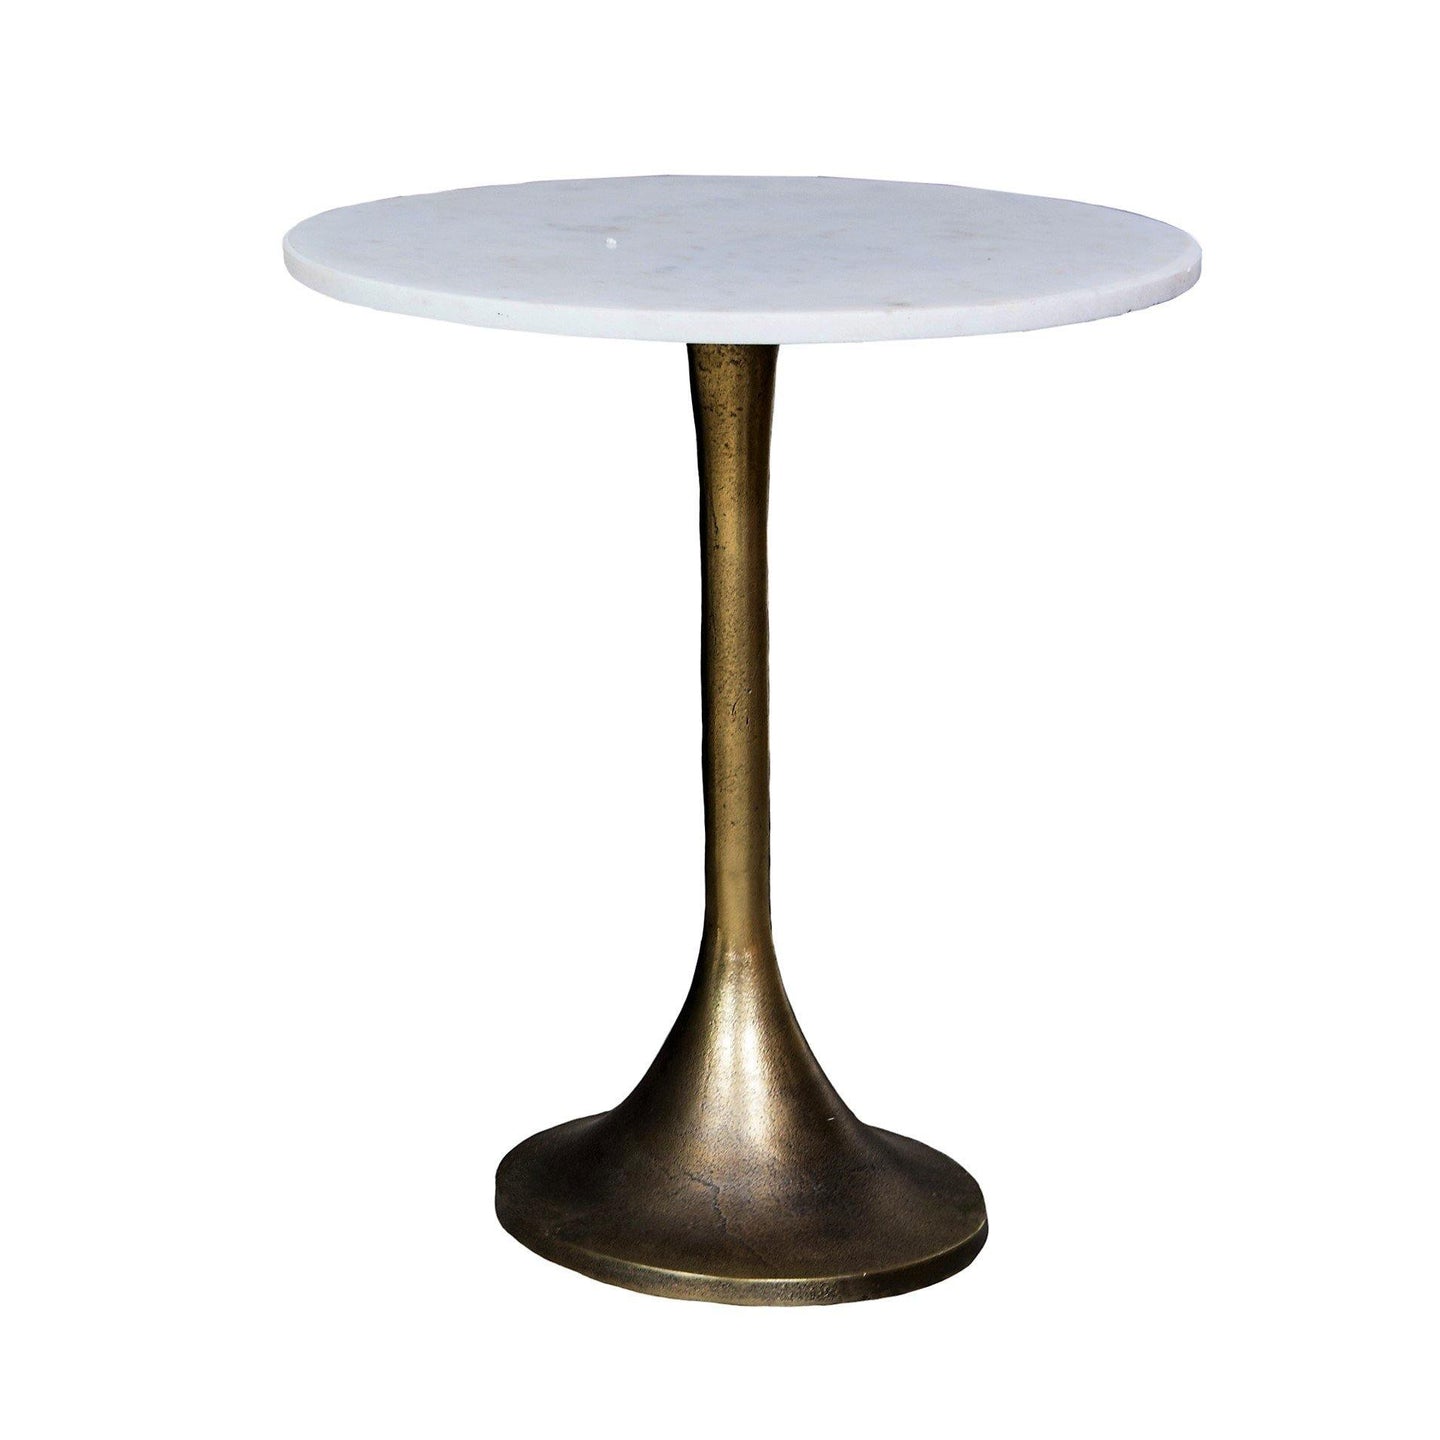 Lounge Styles j&k imports Café Coffee Occasional Round Side Table Metal Brass Marble Top